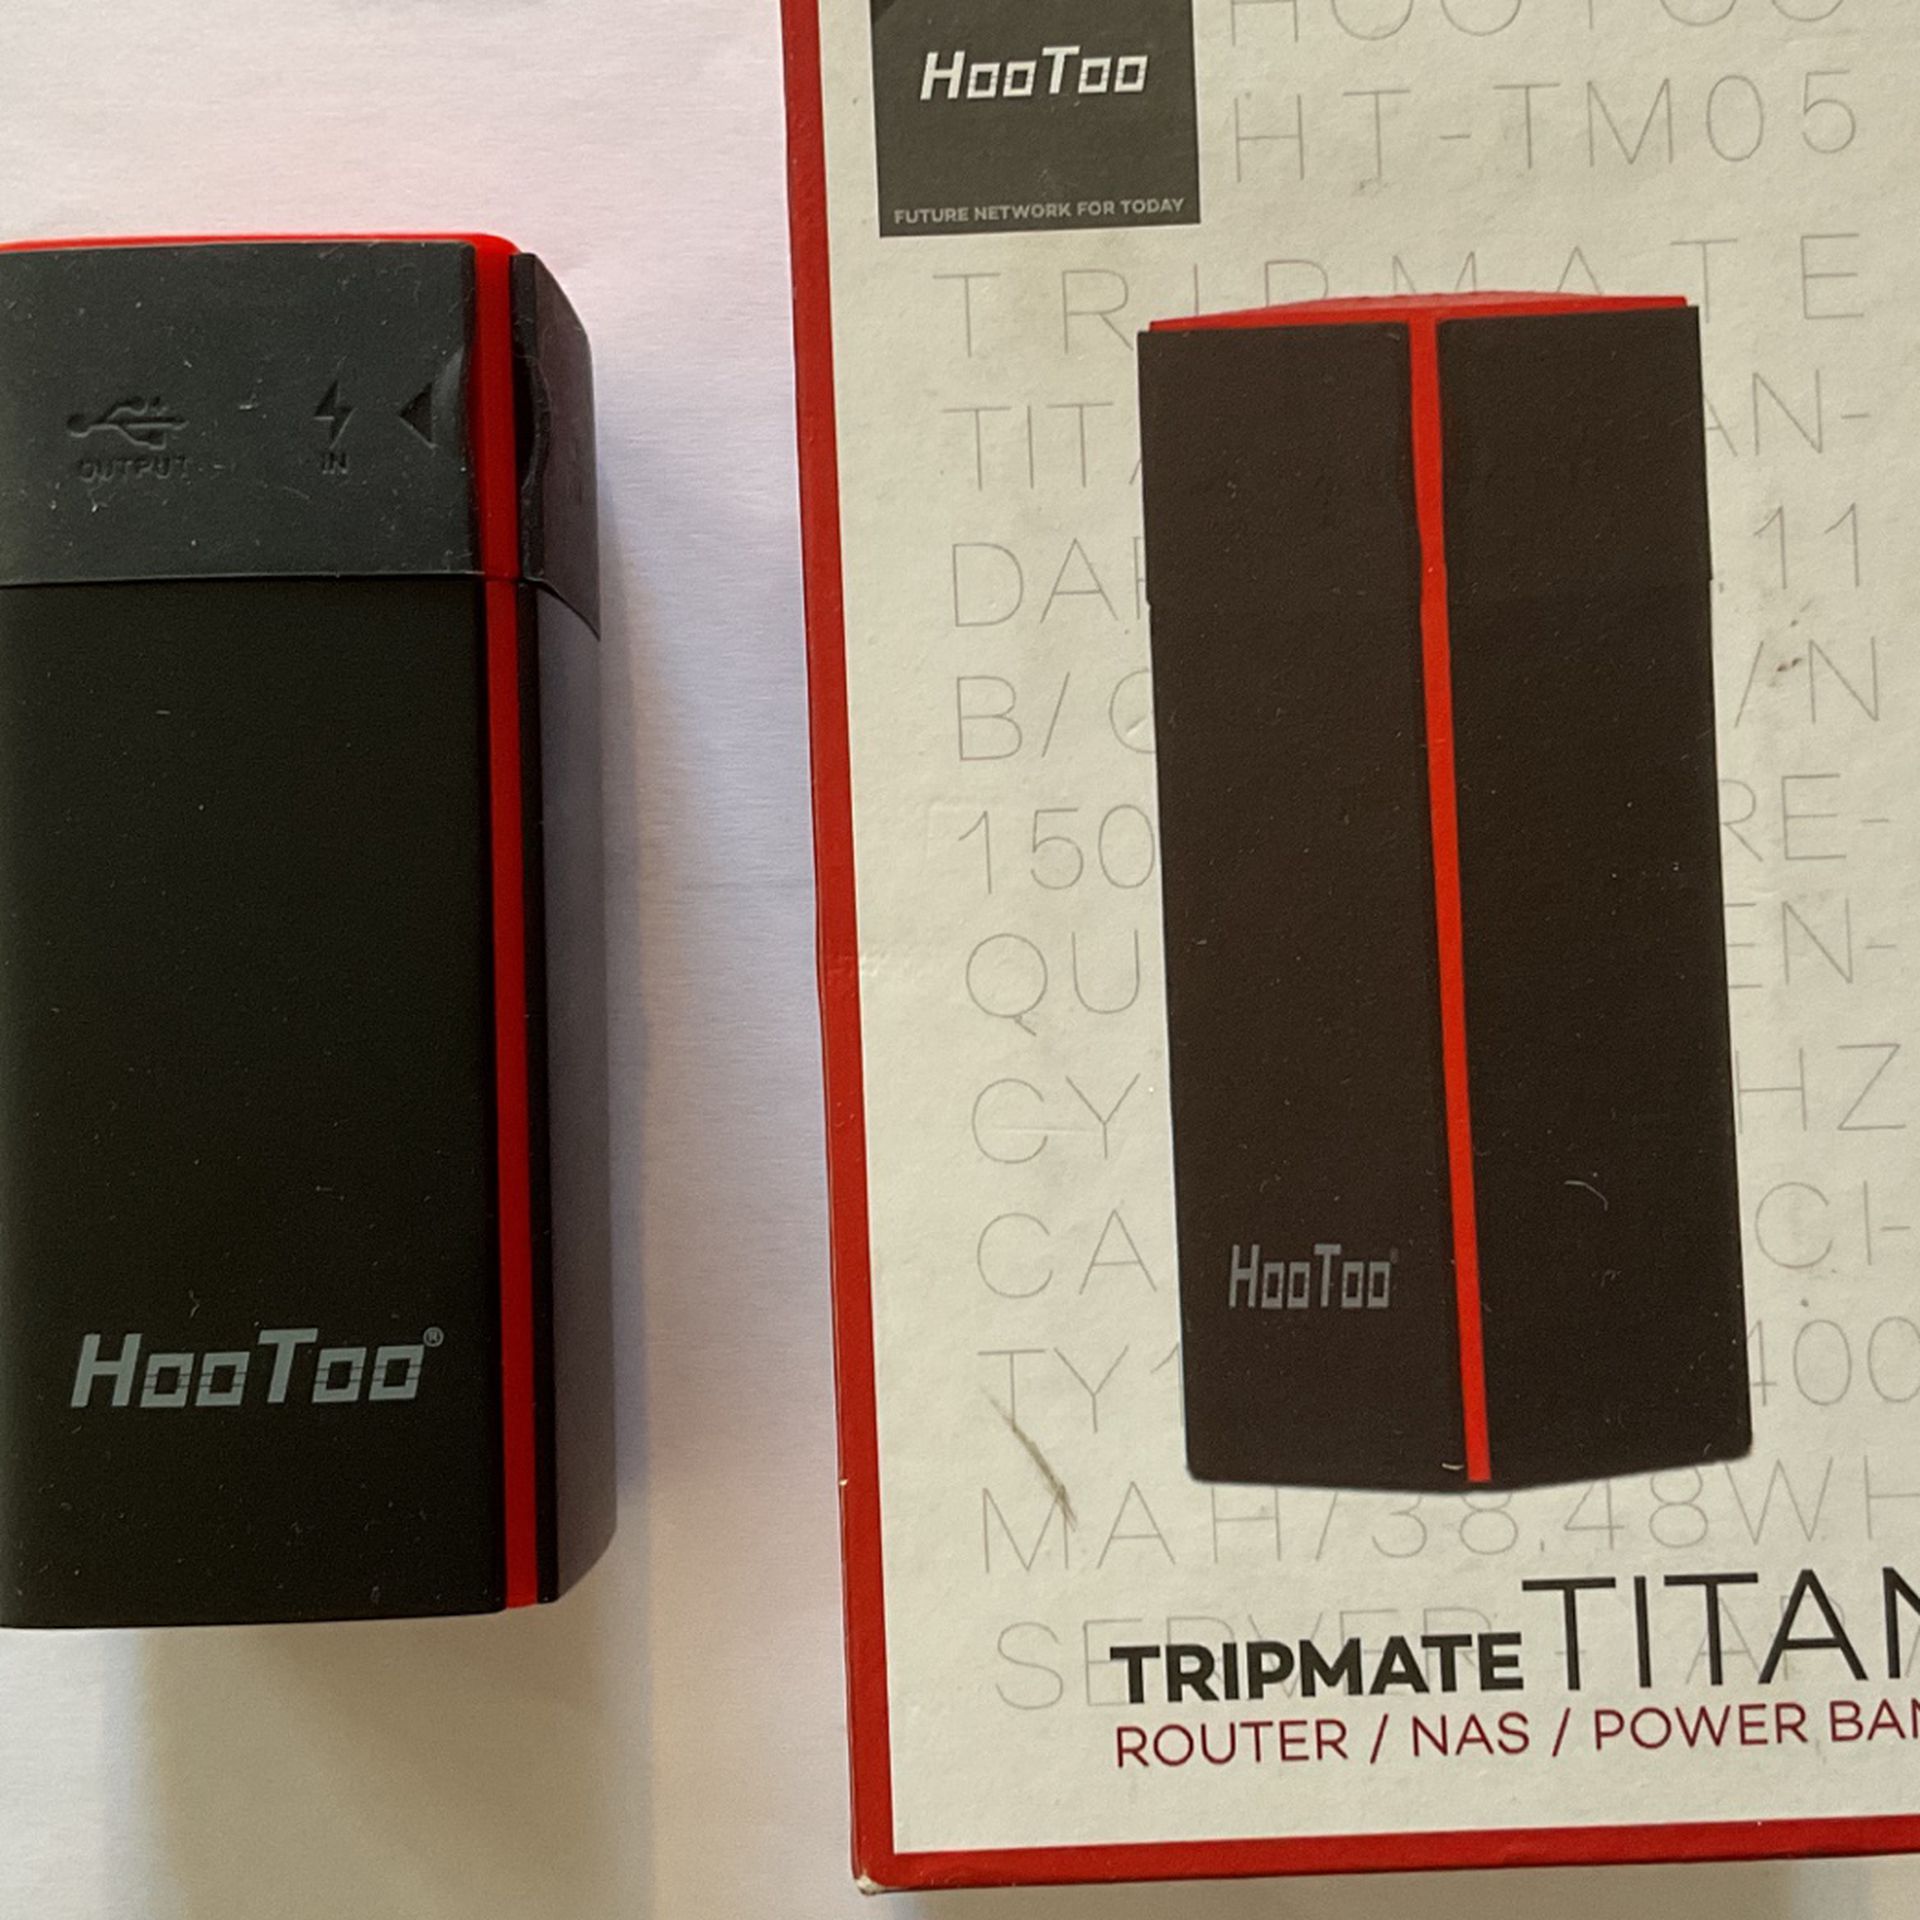 Hootoo Tripmate Titan Portable Router, Repeater, 10400 Mah Battery Bank, This Unit Can Broadcast Public WiFi